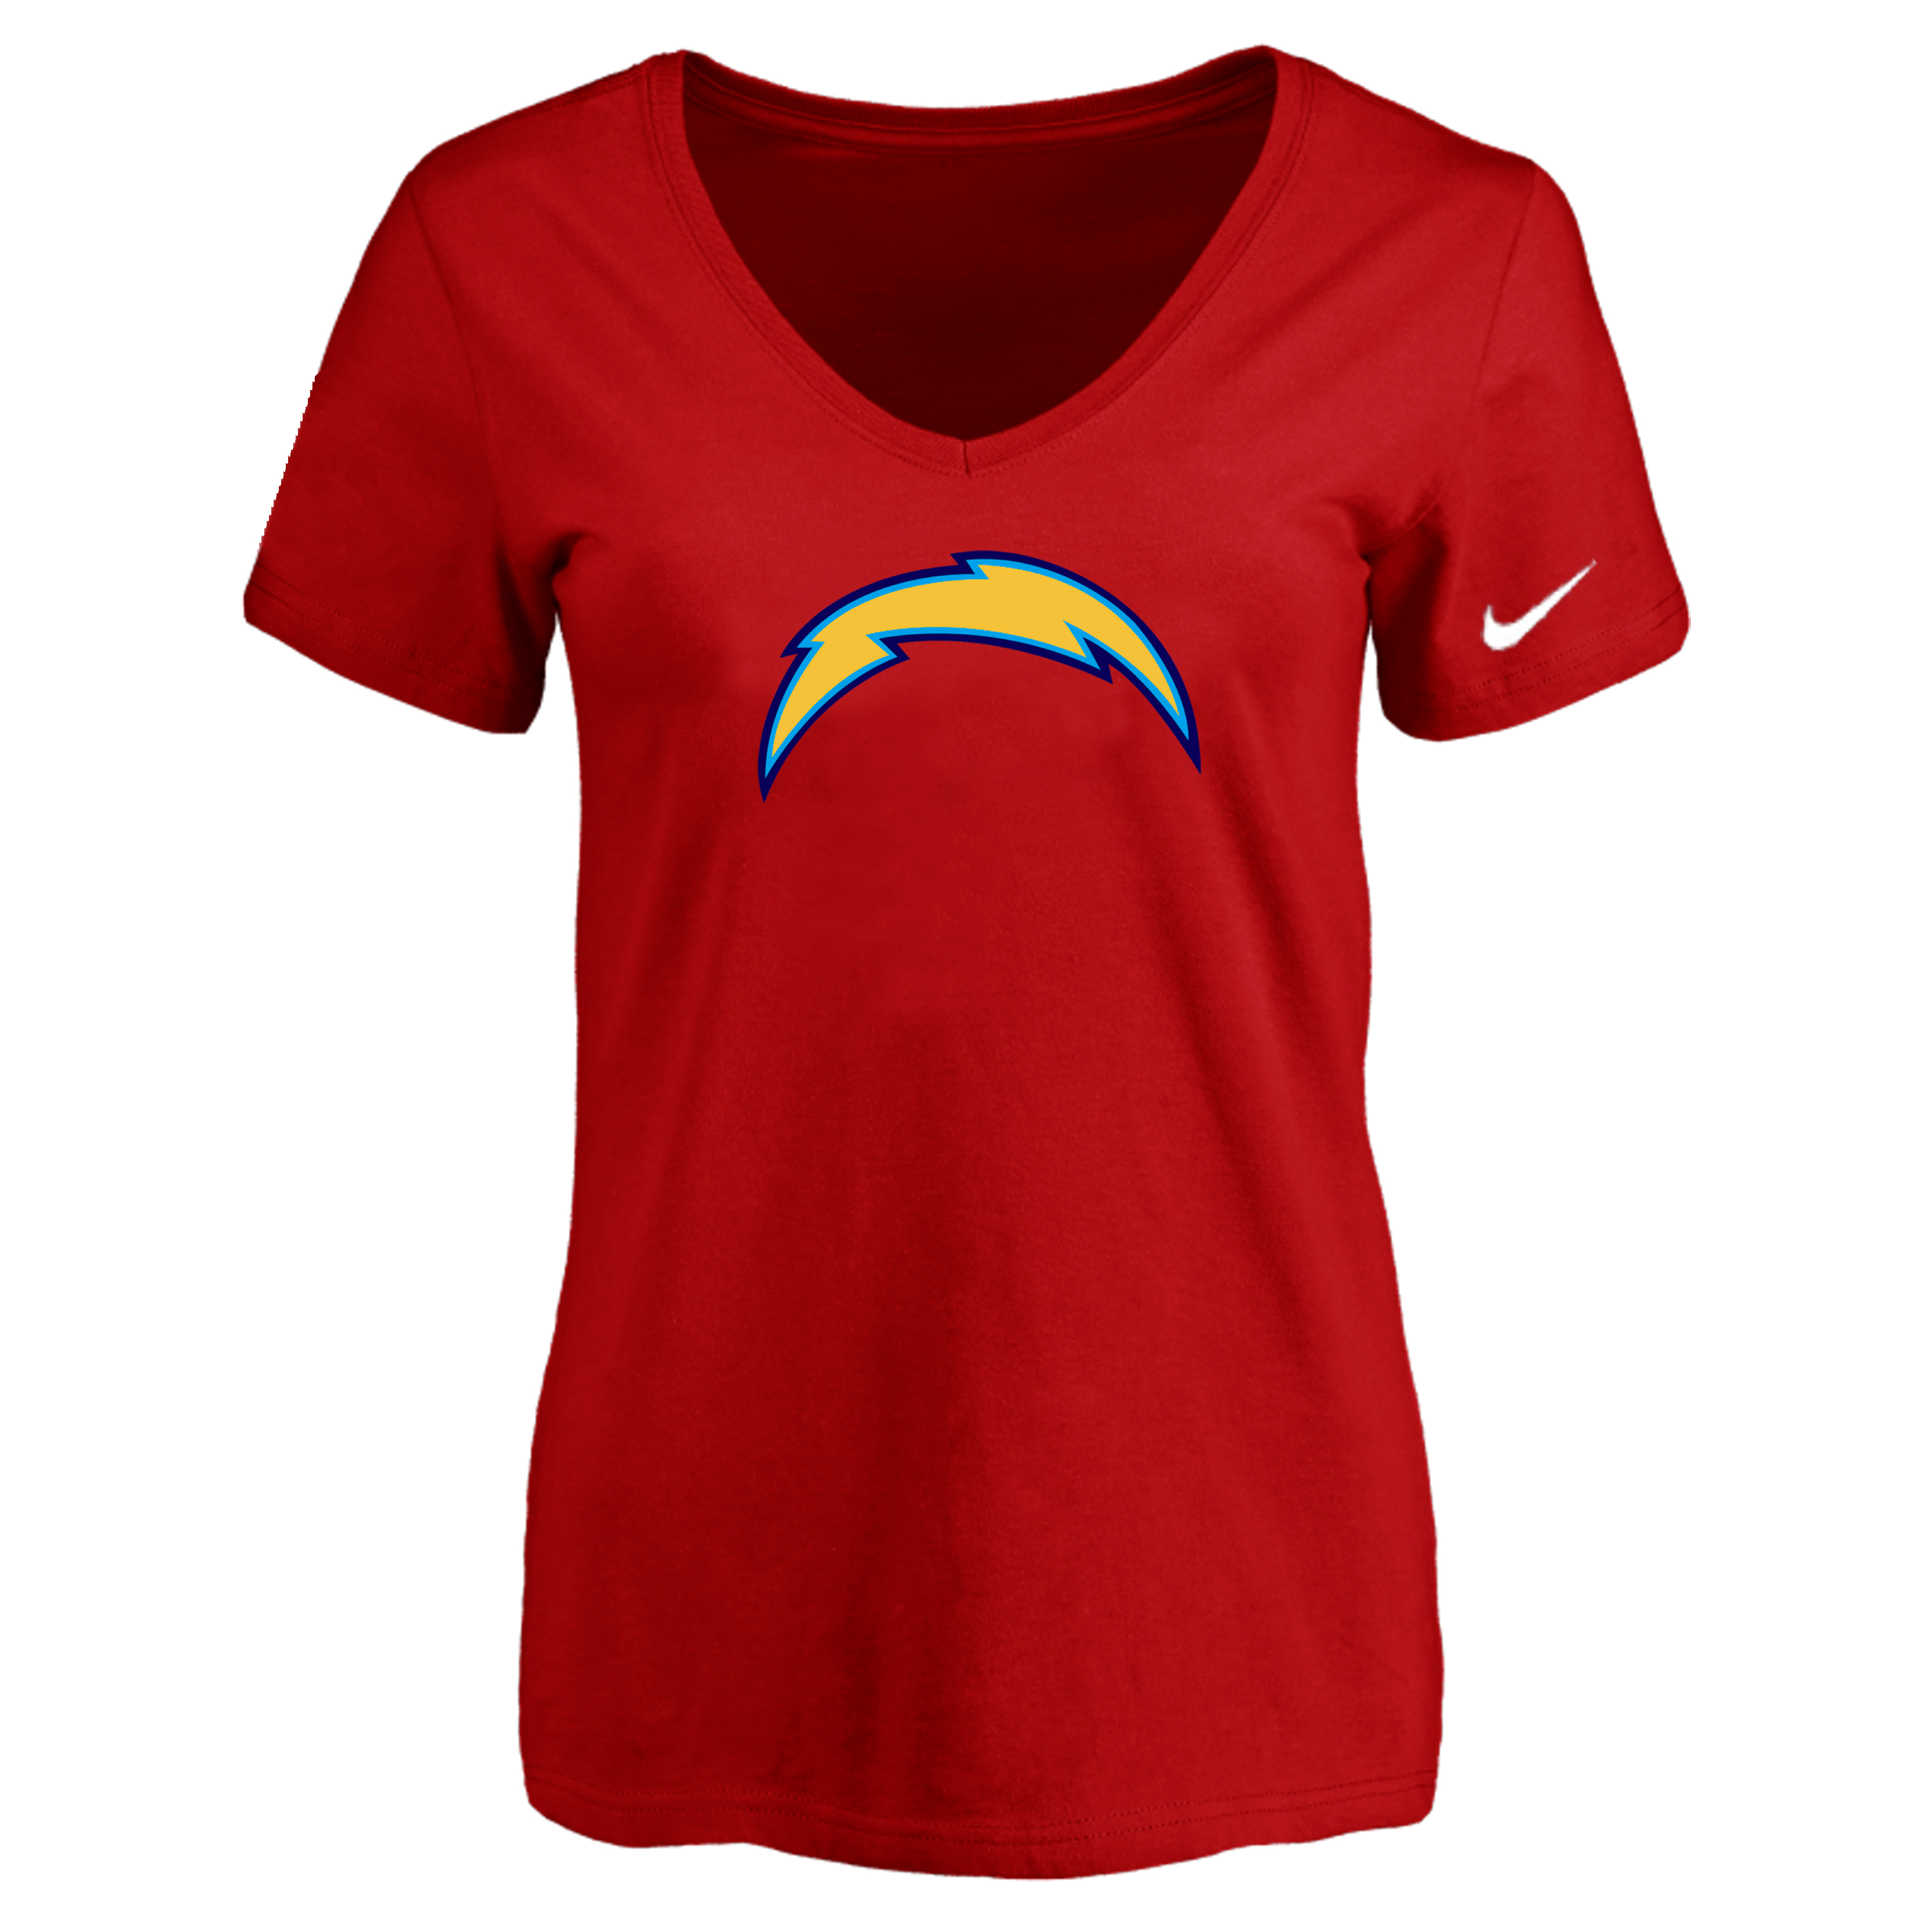 San Diego Chargers Red Women's Logo V neck T-Shirt